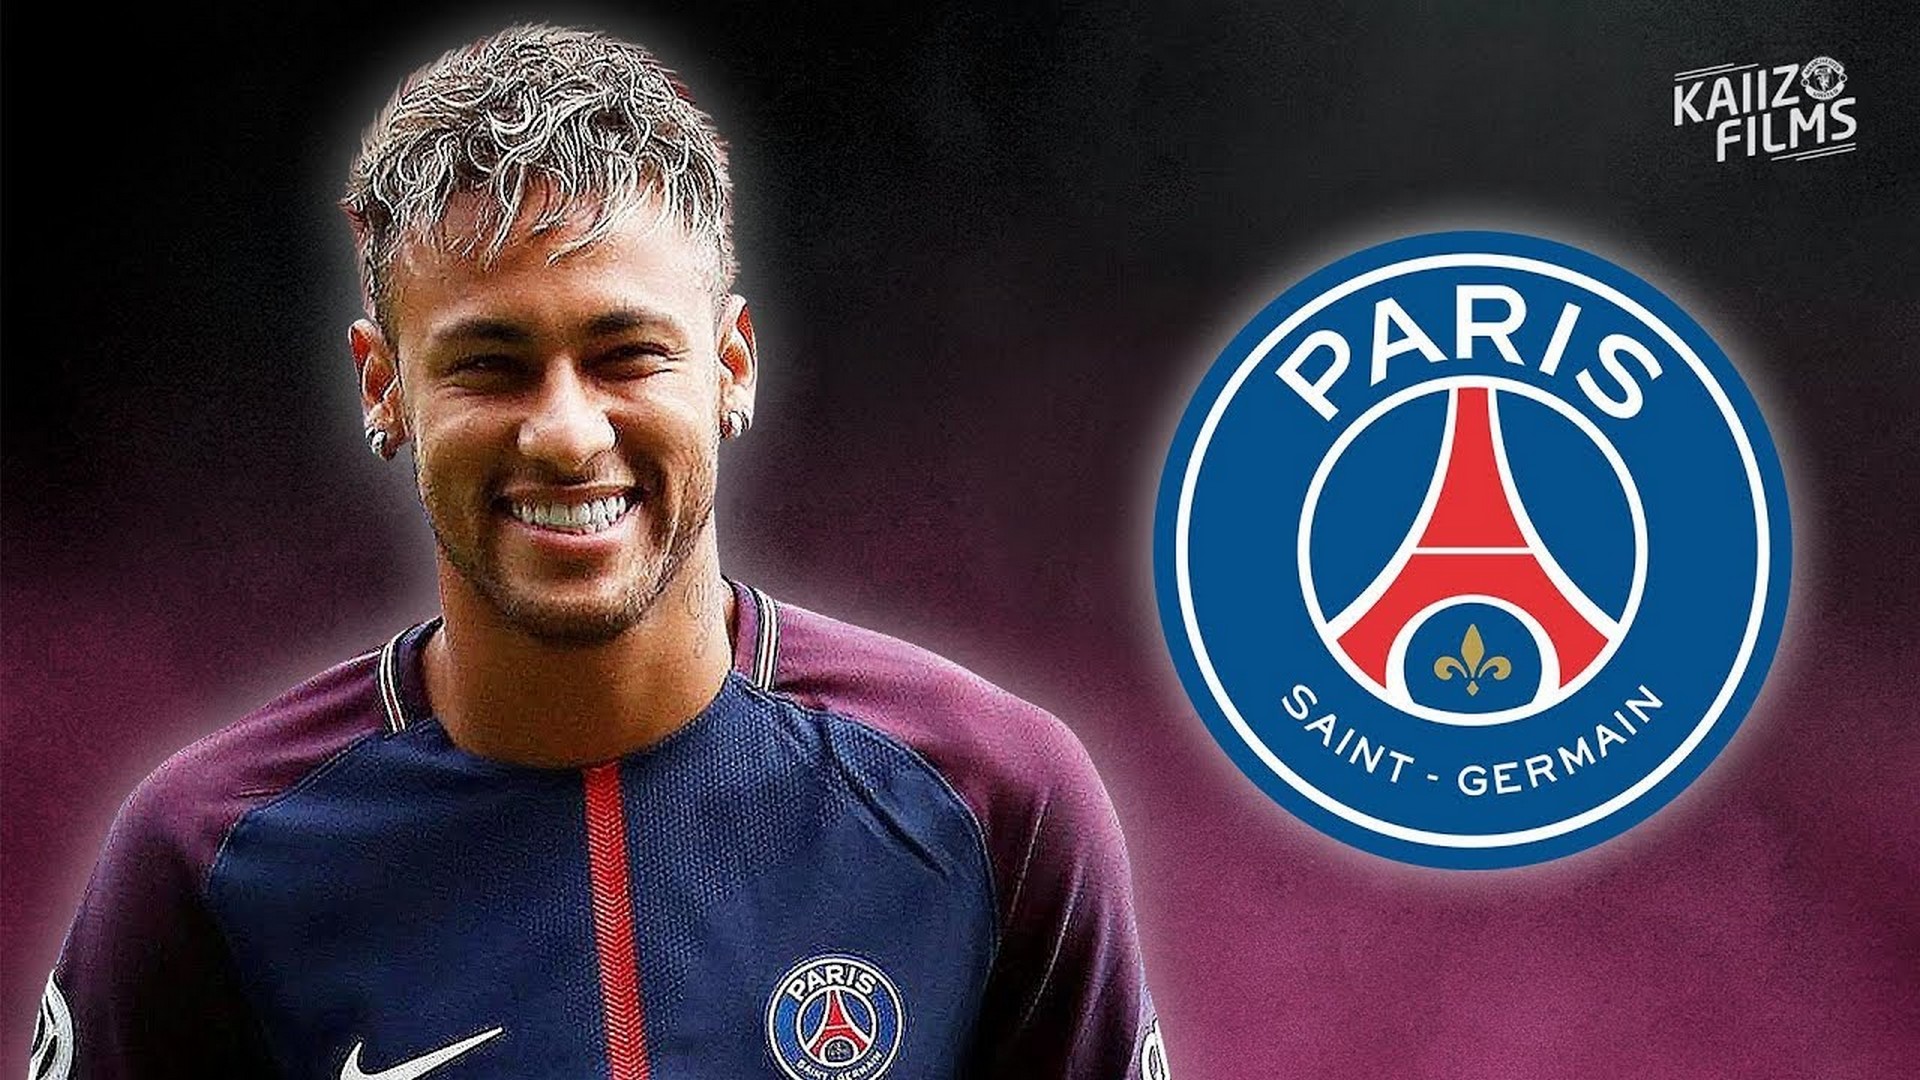 Neymar PSG Desktop Wallpaper with image resolution 1920x1080 pixel. You can use this wallpaper as background for your desktop Computer Screensavers, Android or iPhone smartphones